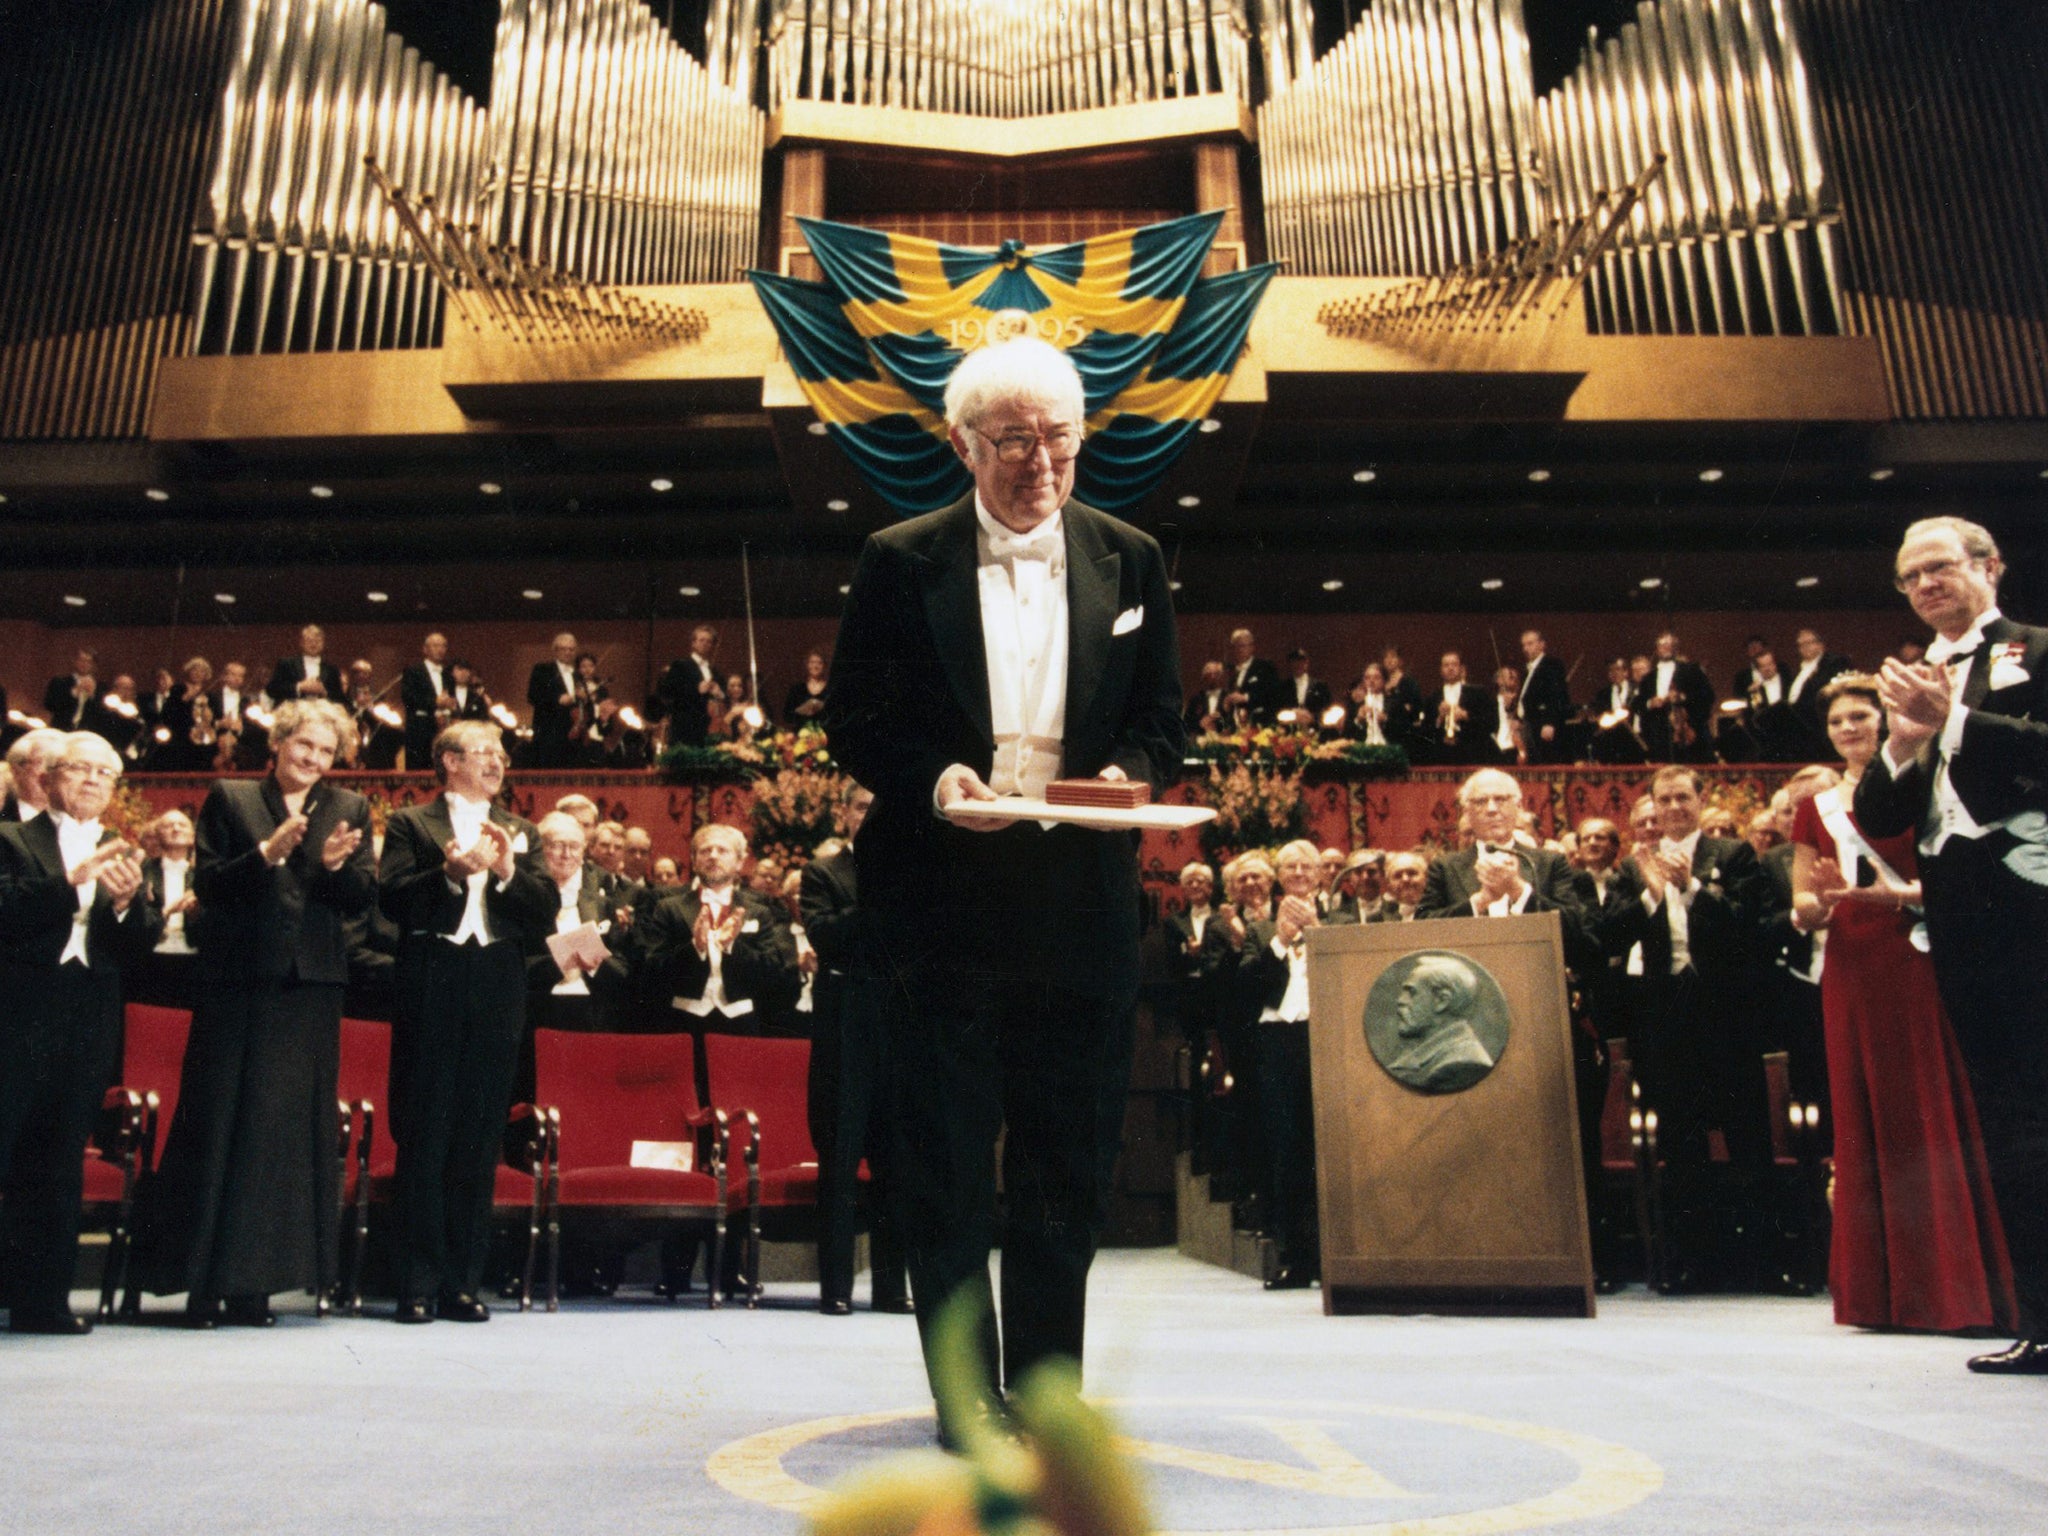 Seamus Heaney poses with the Nobel Prize for Literature he received during the Nobel ceremonies in Stockholm on 10 December 1995